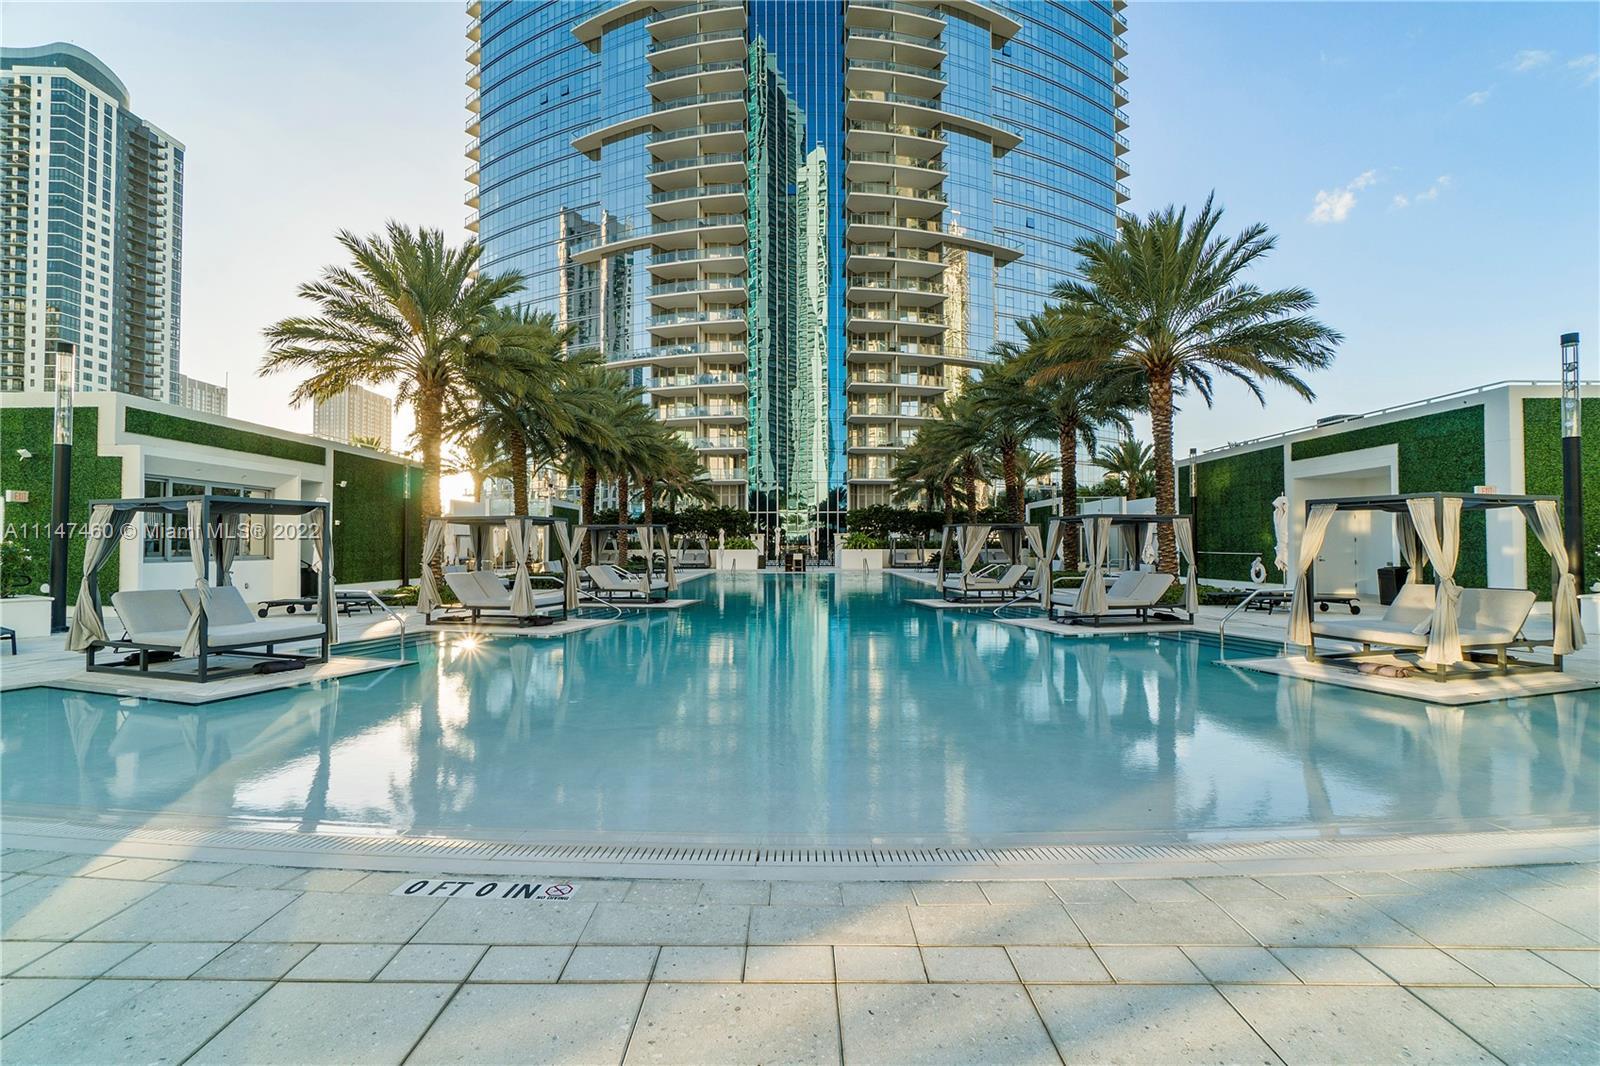 PARAMOUNT Miami Worldcenter, the building with the most amenities in the world such as 5 pools, spa,